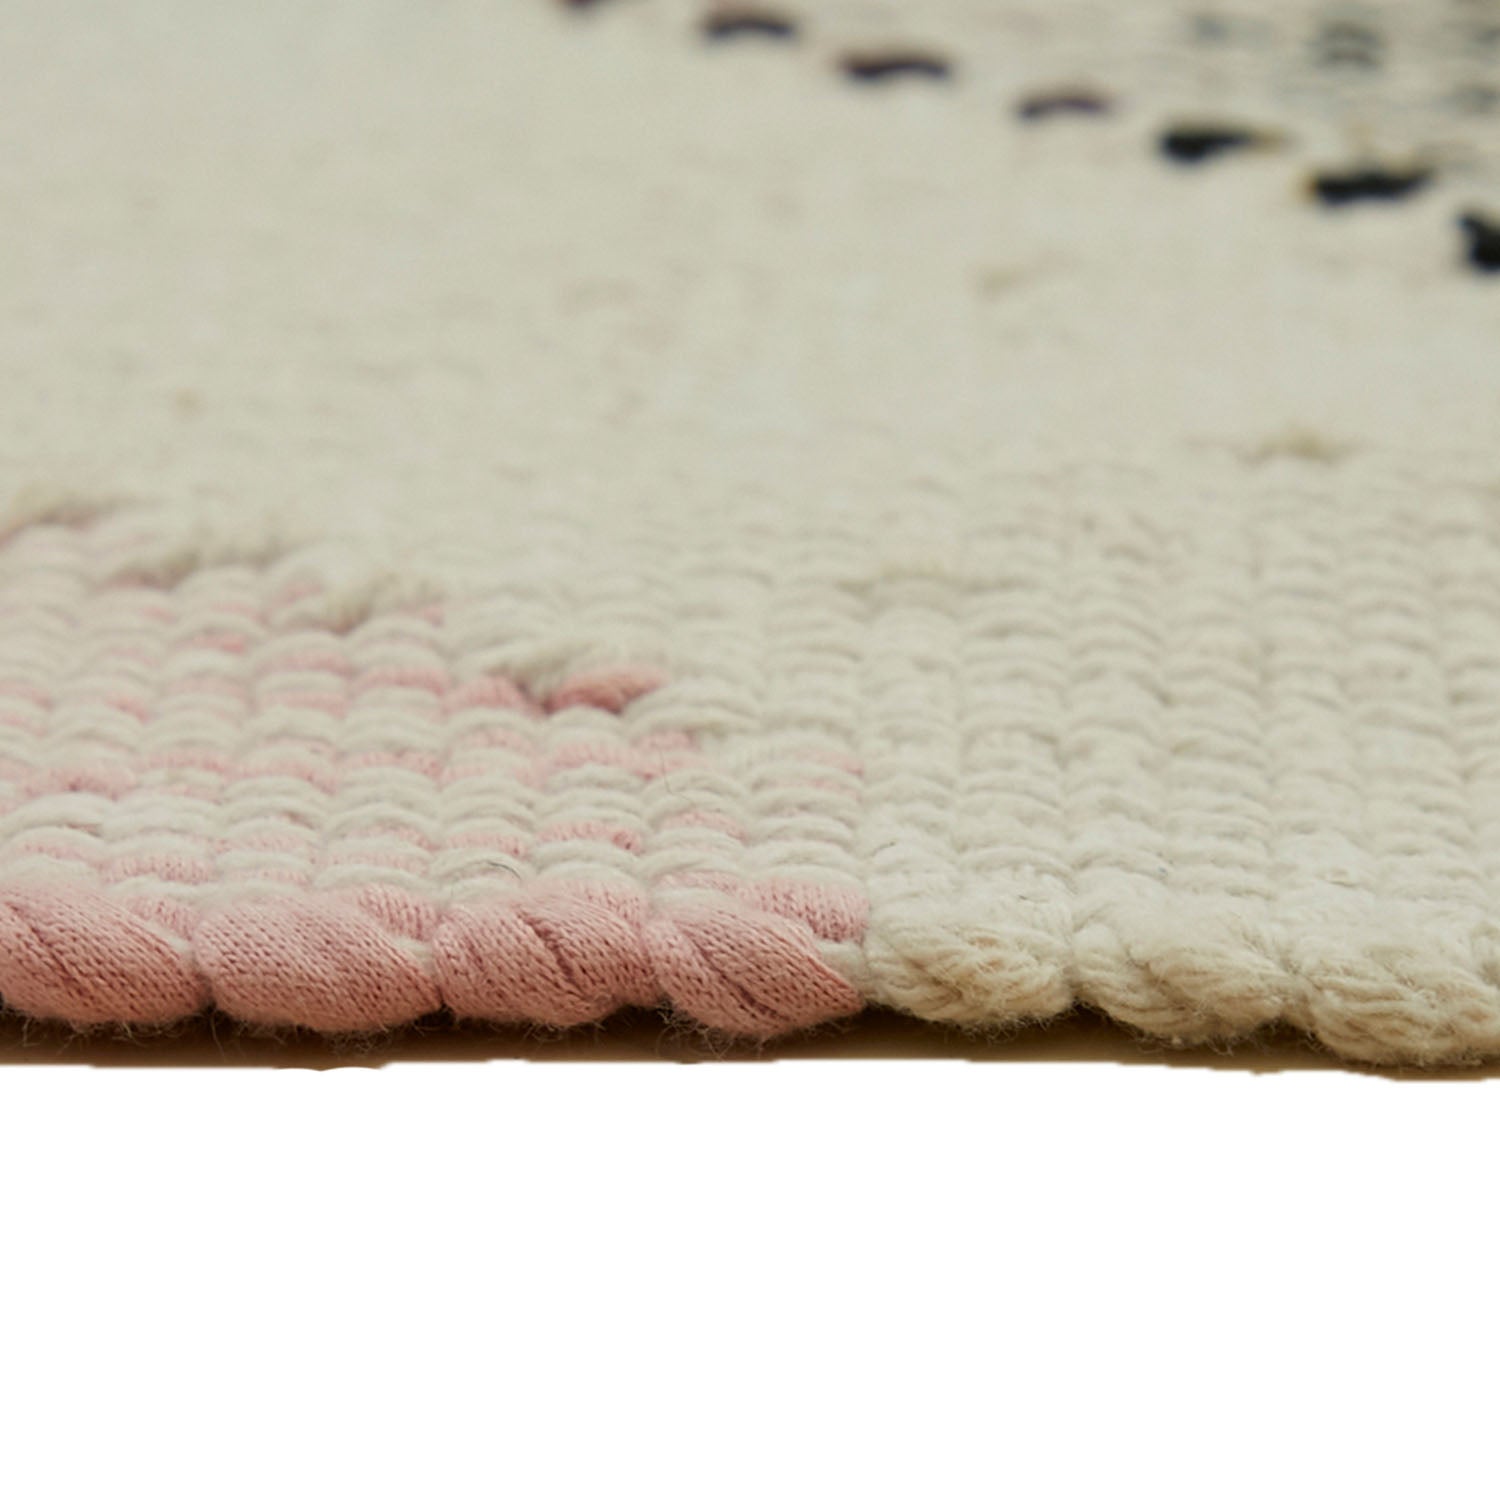 Close-up of a rug with pink scalloping and creamy texture.